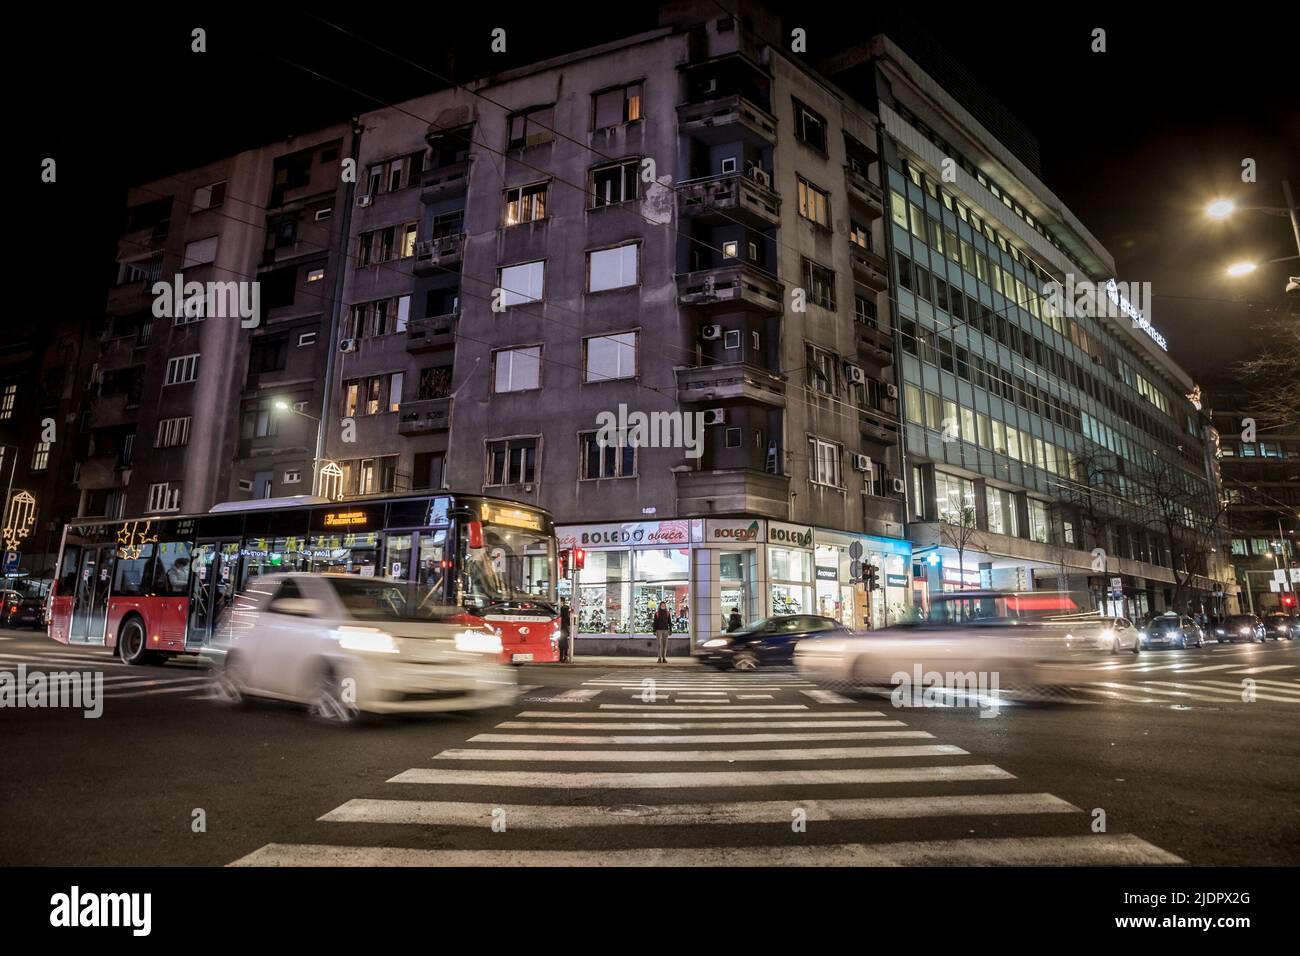 Picture of a zebra crossing in the city center of Belgrade, Serbia, at night, with cars ready to cross the area. It's located in Stari Grad, the busie Stock Photo